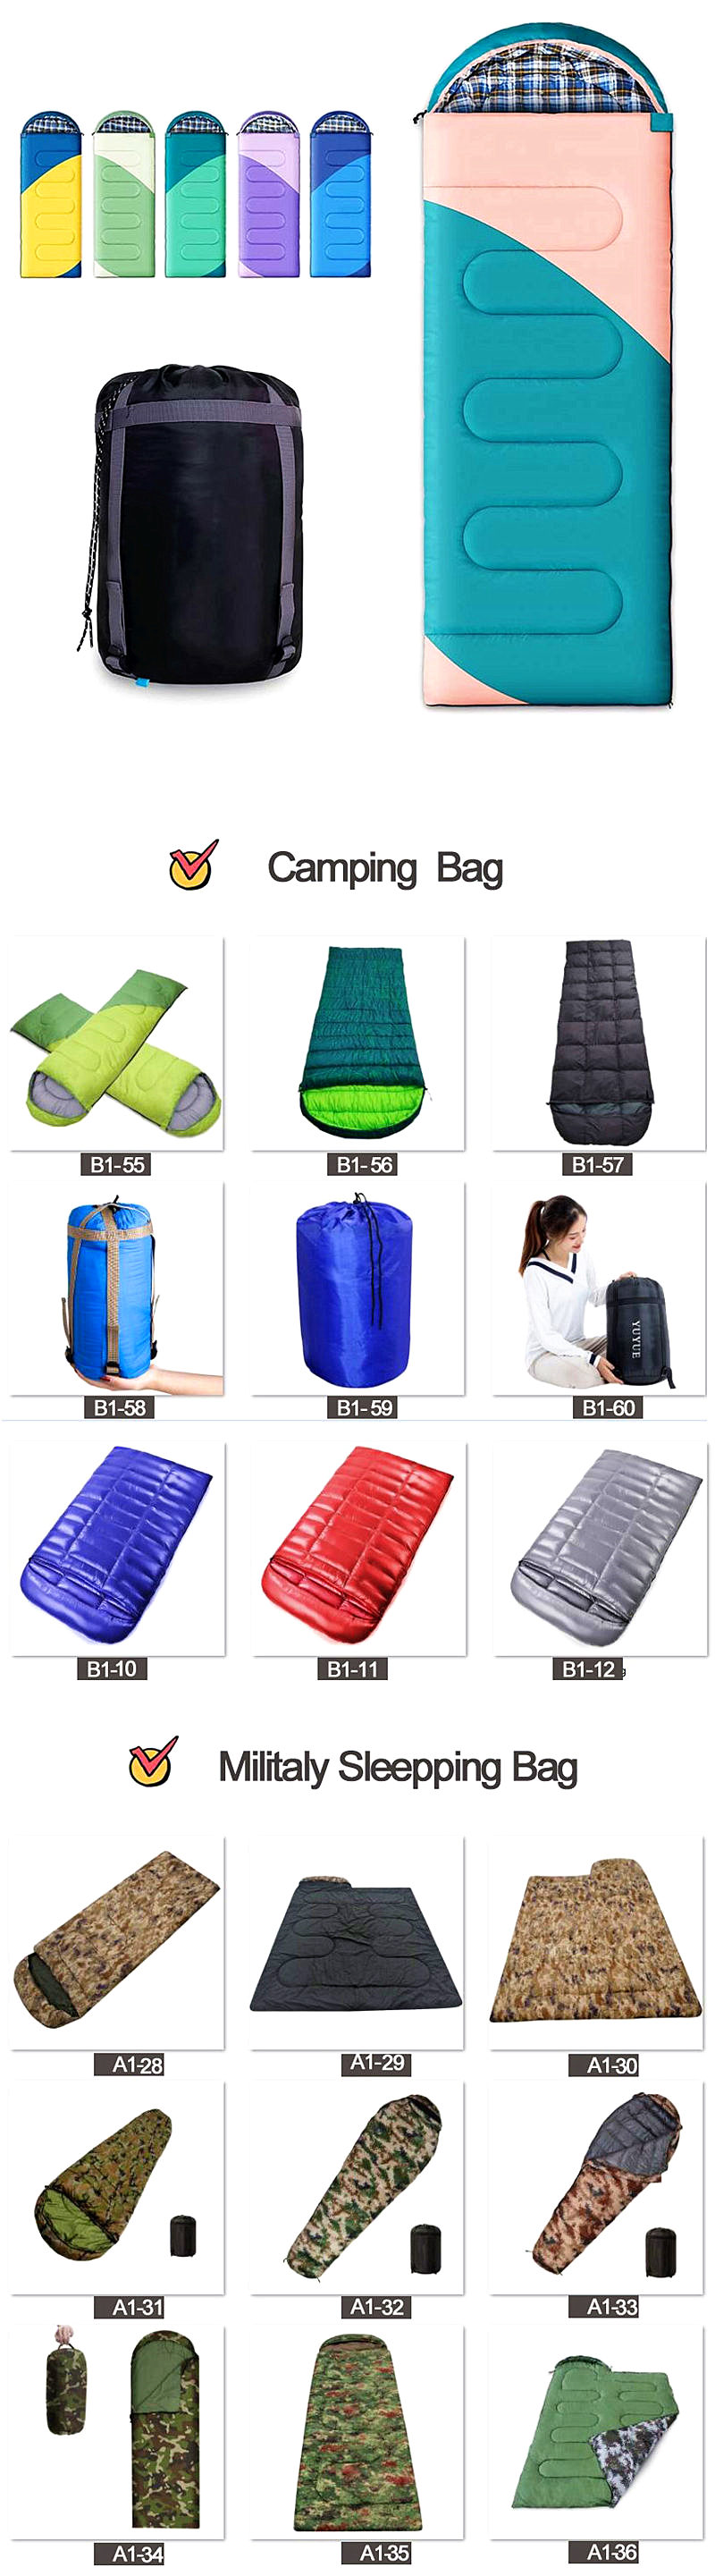 Outdoor Travel Mummy Style Down Sleeping Bag For Outdoor Camping Backpacking